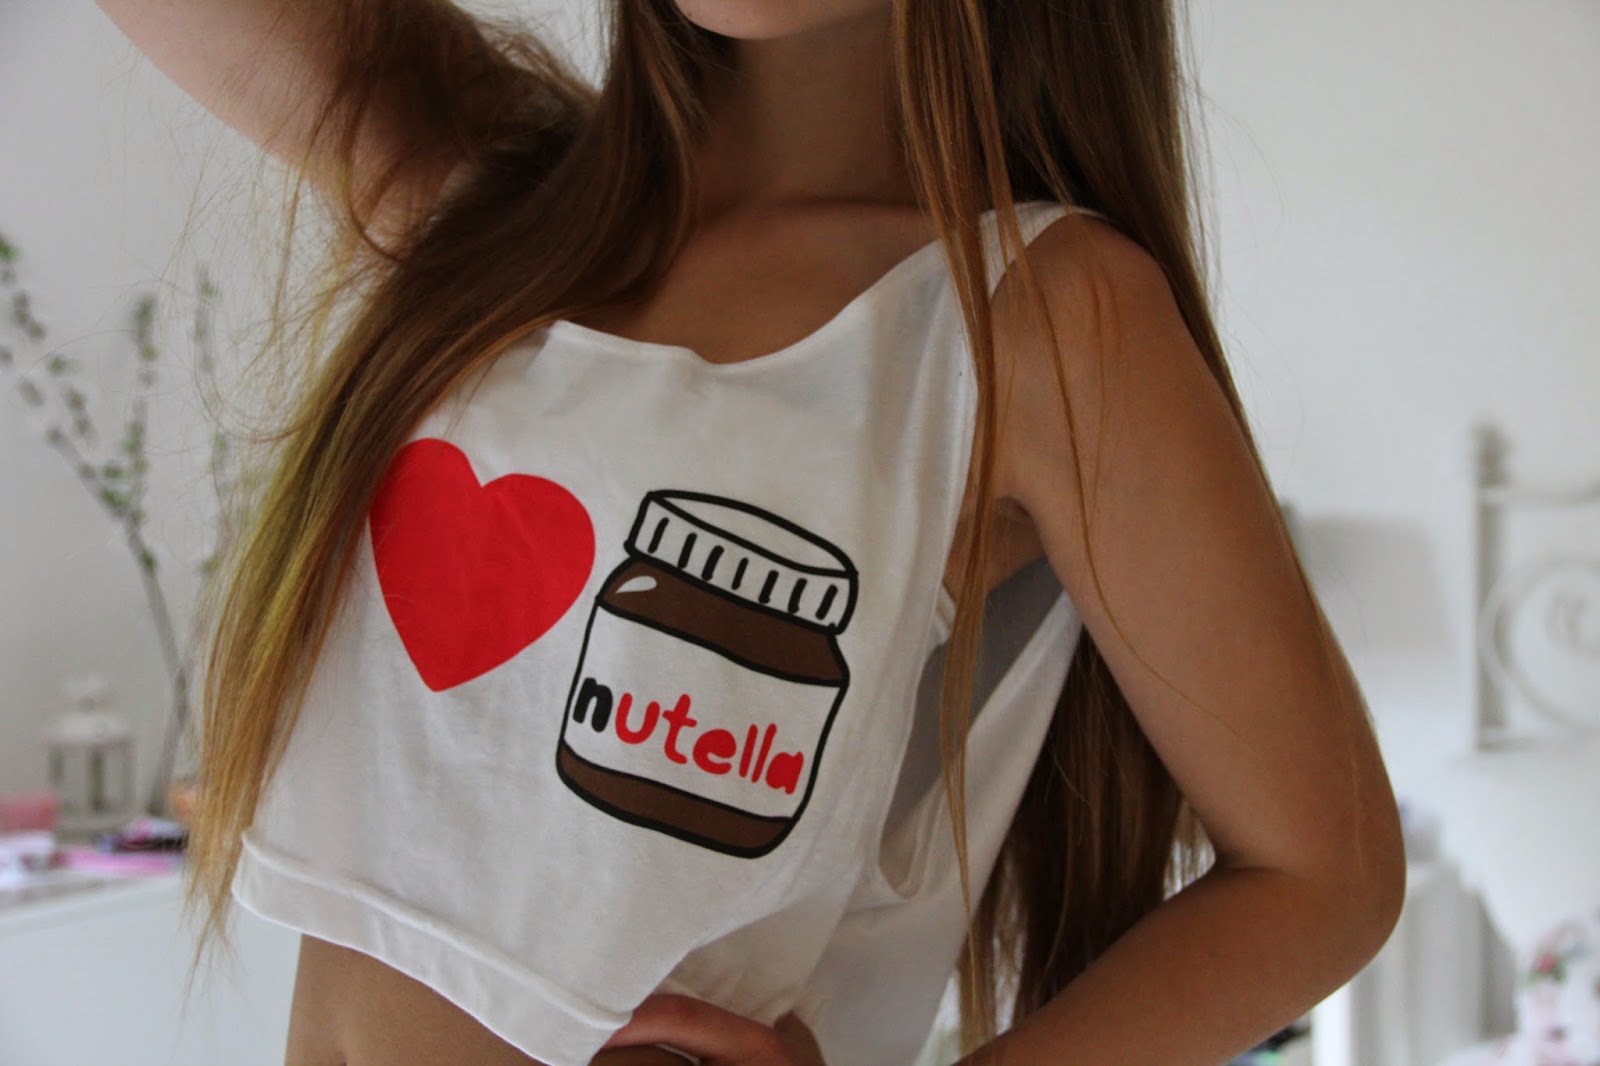 The producer of Nutella, the Ferrero Group, allegedly purchases 25% 

of the planet's supply of hazelnuts.